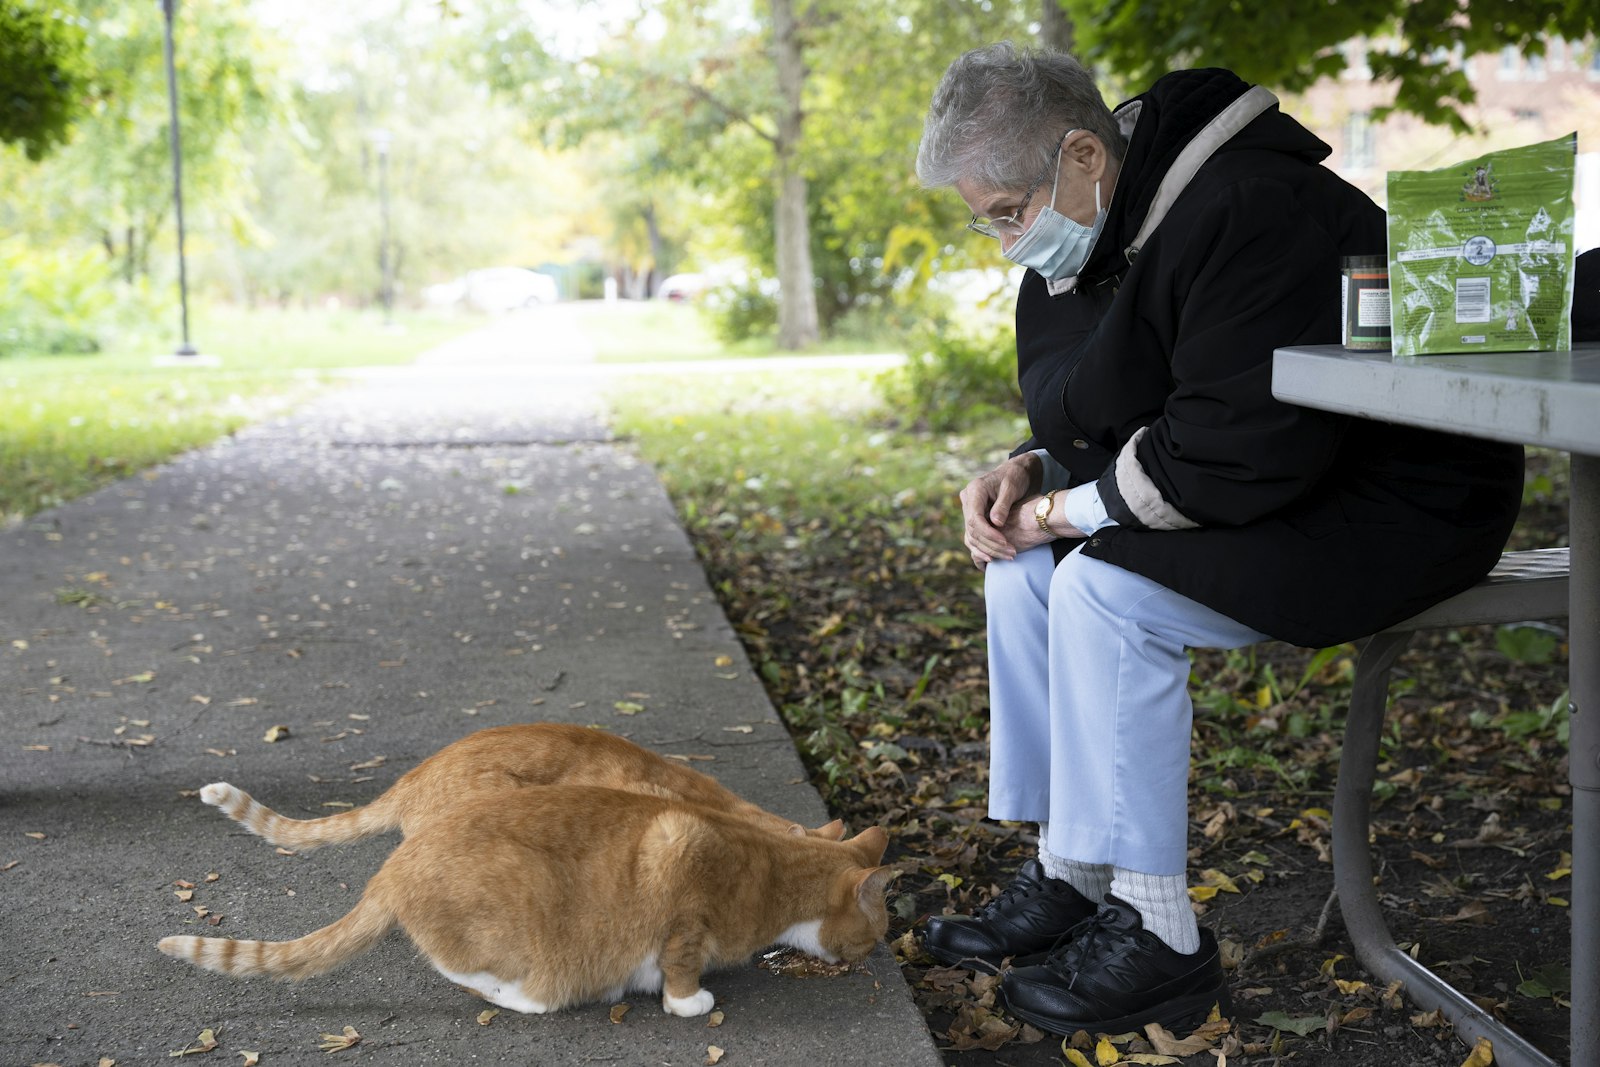 Animals are Sr. Magrie's second love after music. She spends her entire allowance on food to feed the outdoor cats and visits them to lift her spirits when she is sad. (Photos by Gabriella Patti | Detroit Catholic)